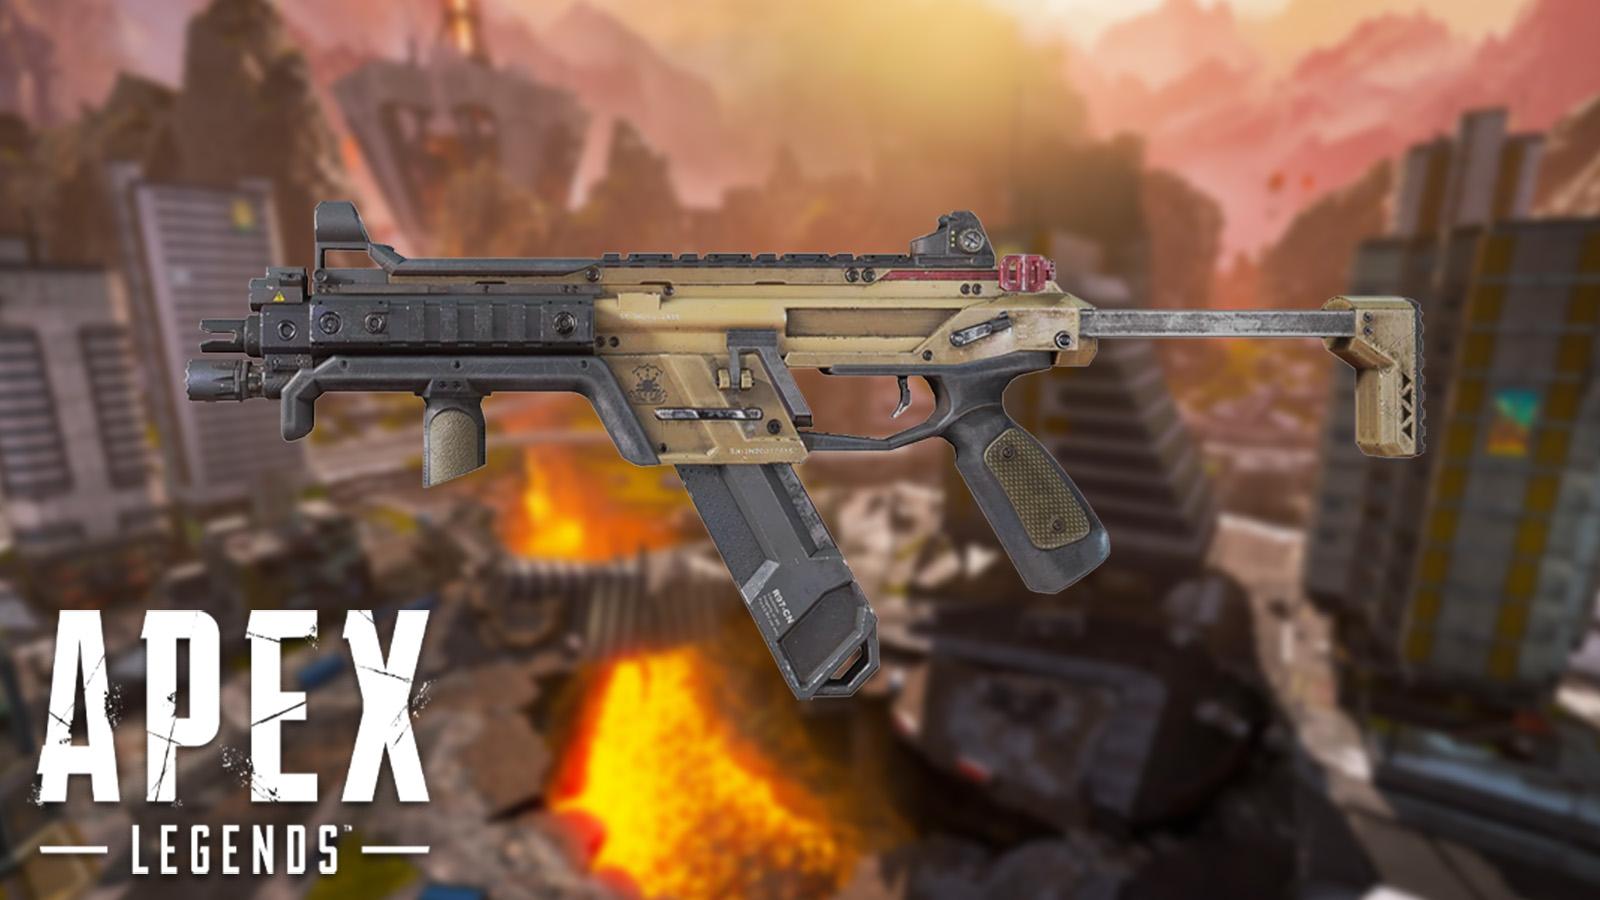 R99 SMG on Apex Legends World's Edge background with game logo